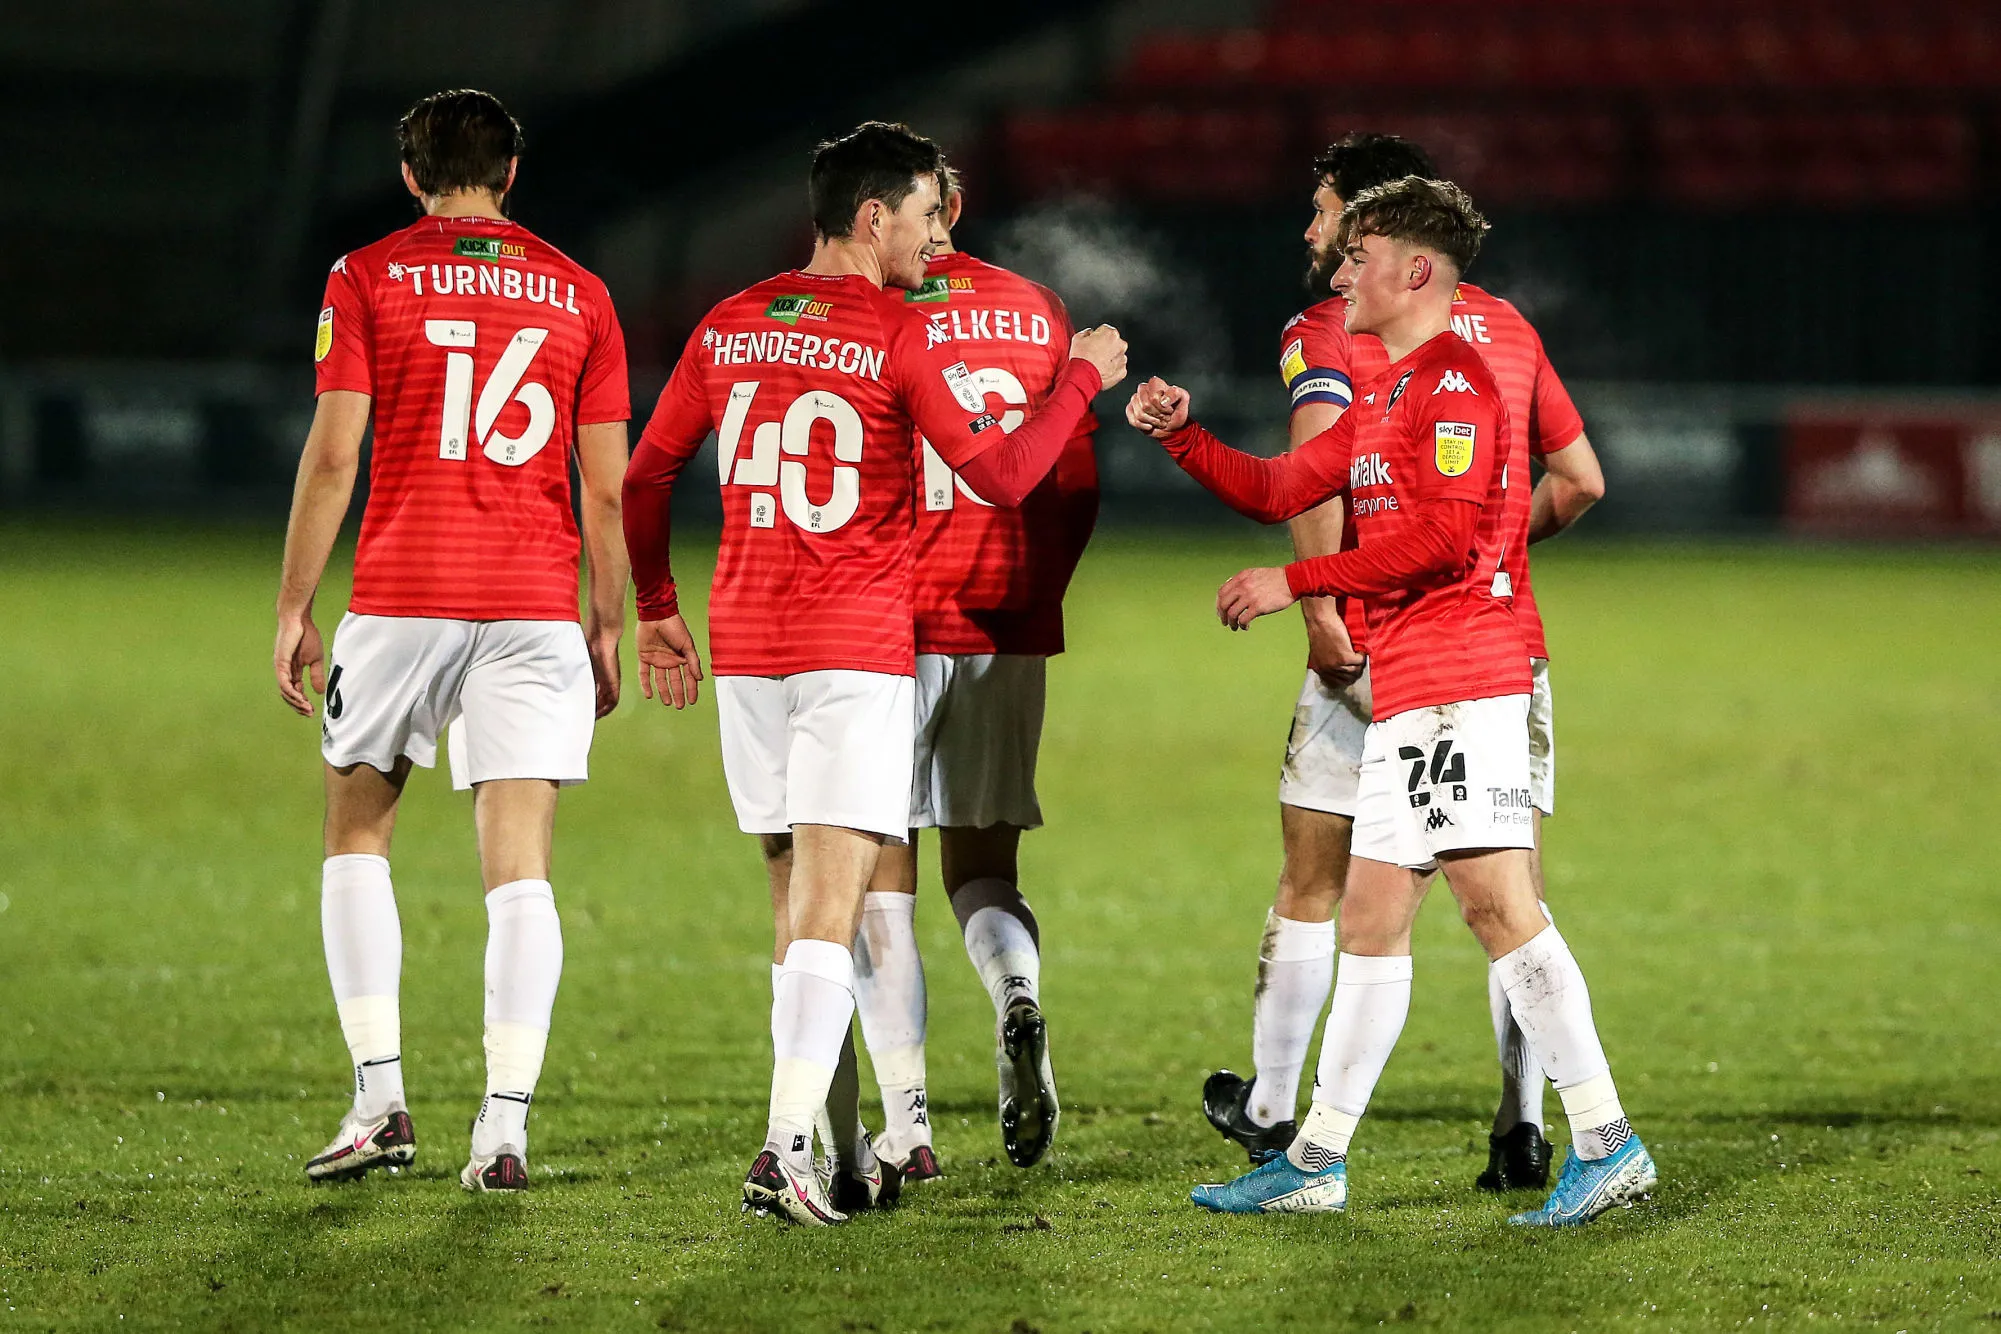 Salford City, champion durant 24 heures seulement